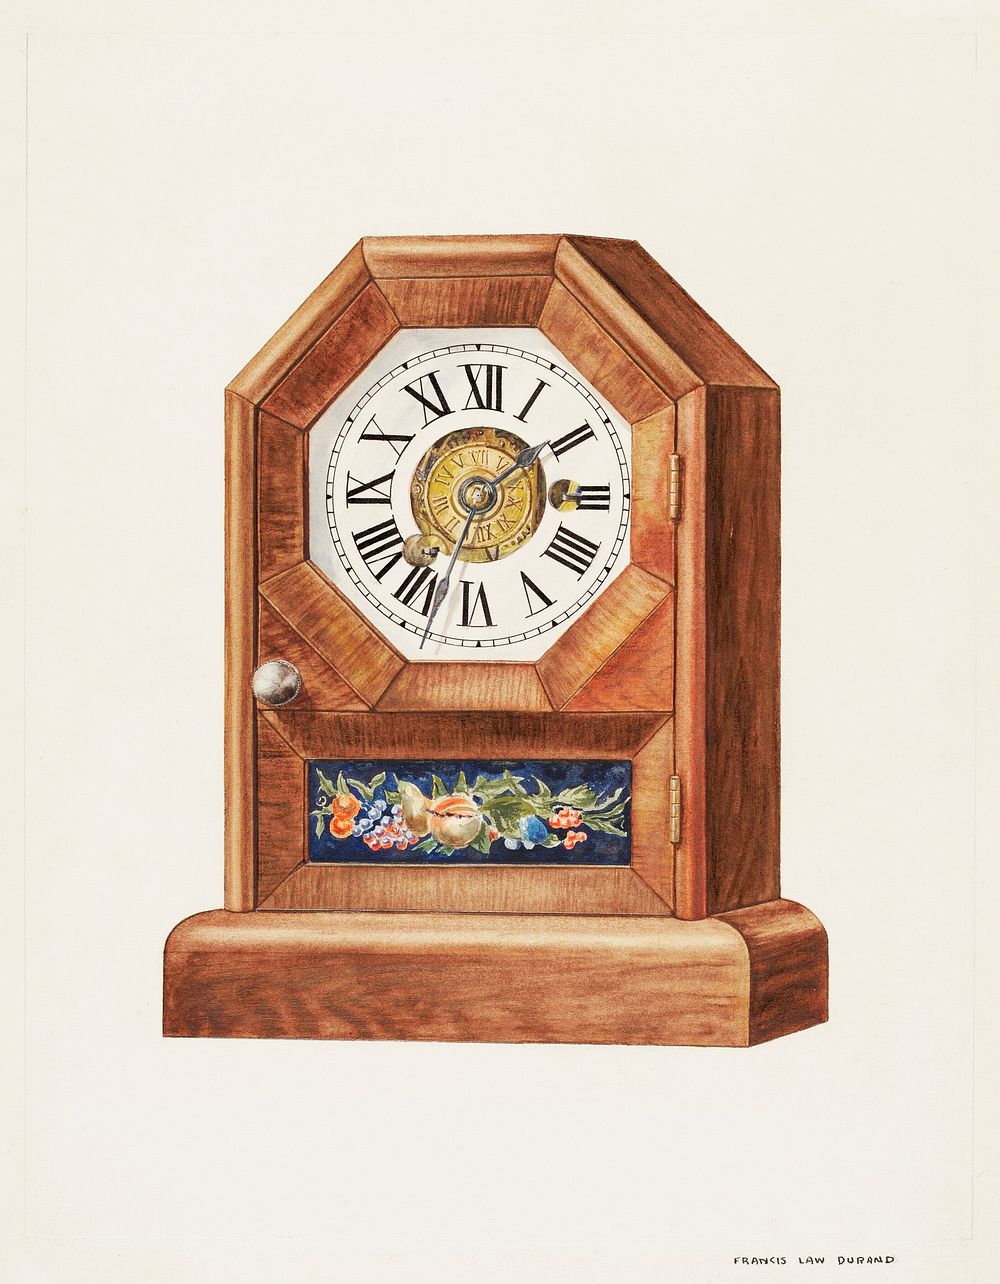 Alarm Clock (Timepiece) (ca. 1937) by Francis Law Durand. Original from The National Gallery of Art. Digitally enhanced by…